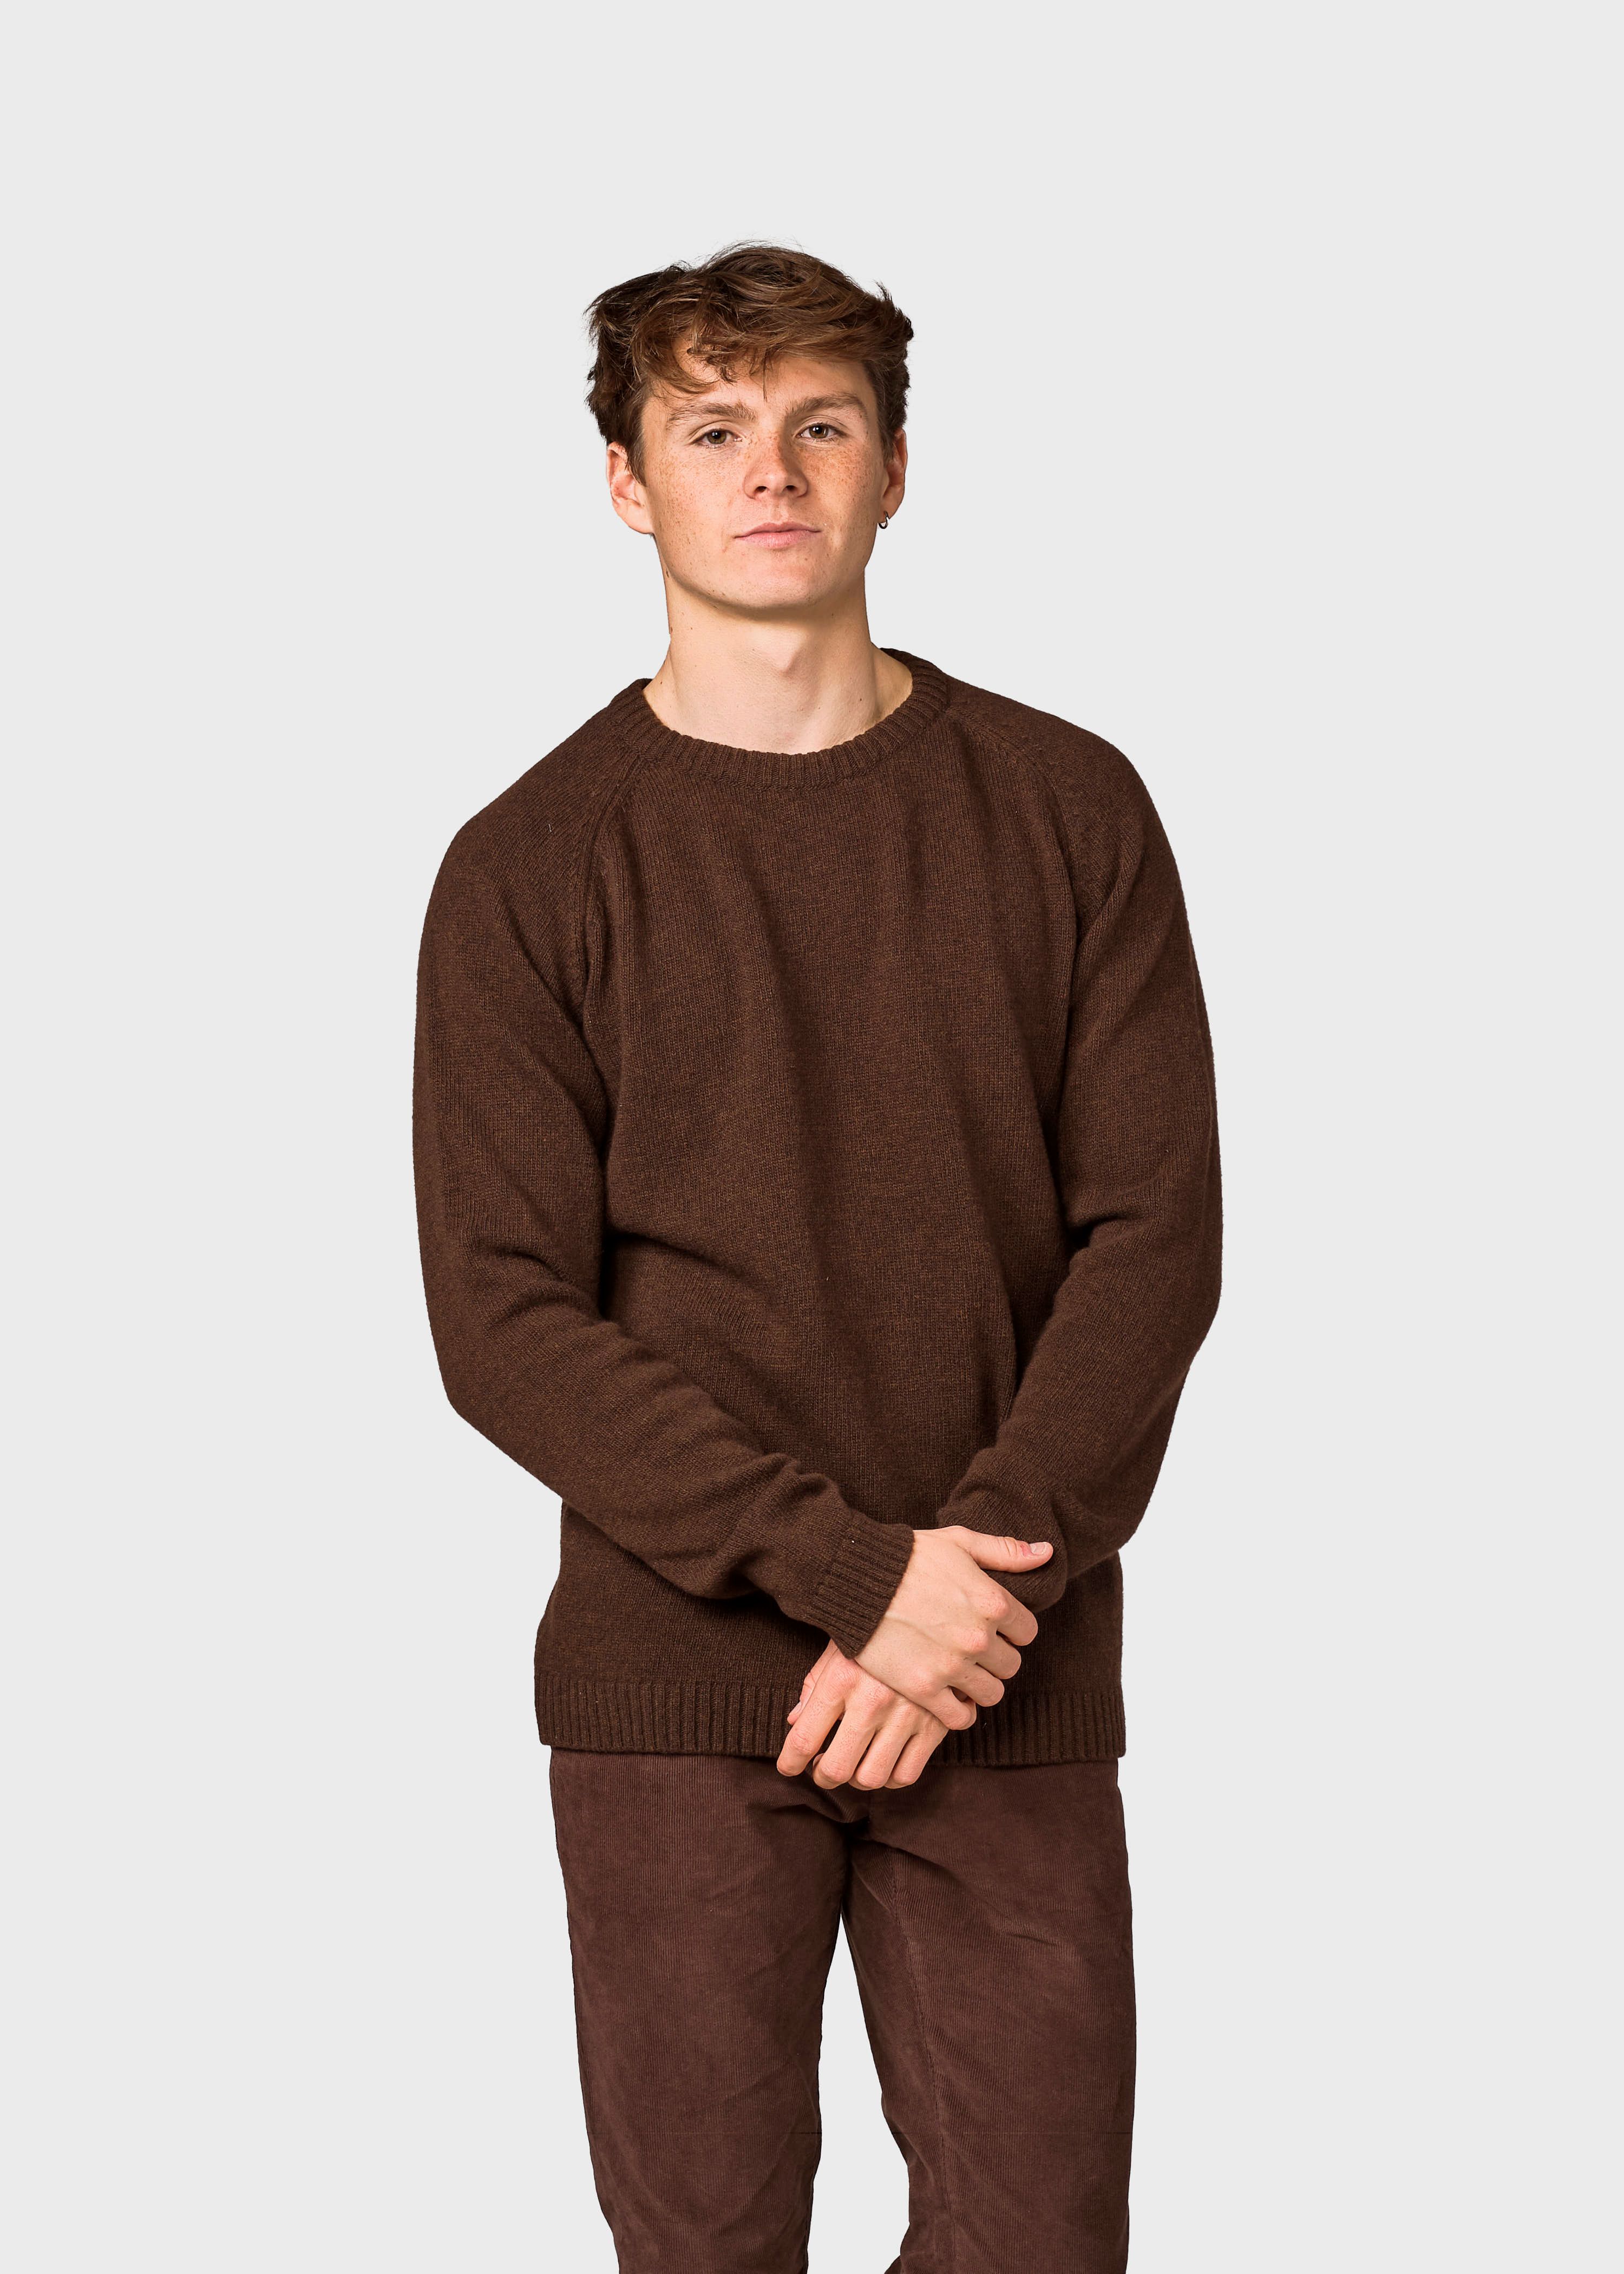 Herren-Strickpullover Ole knit Earth (100% Wolle) 